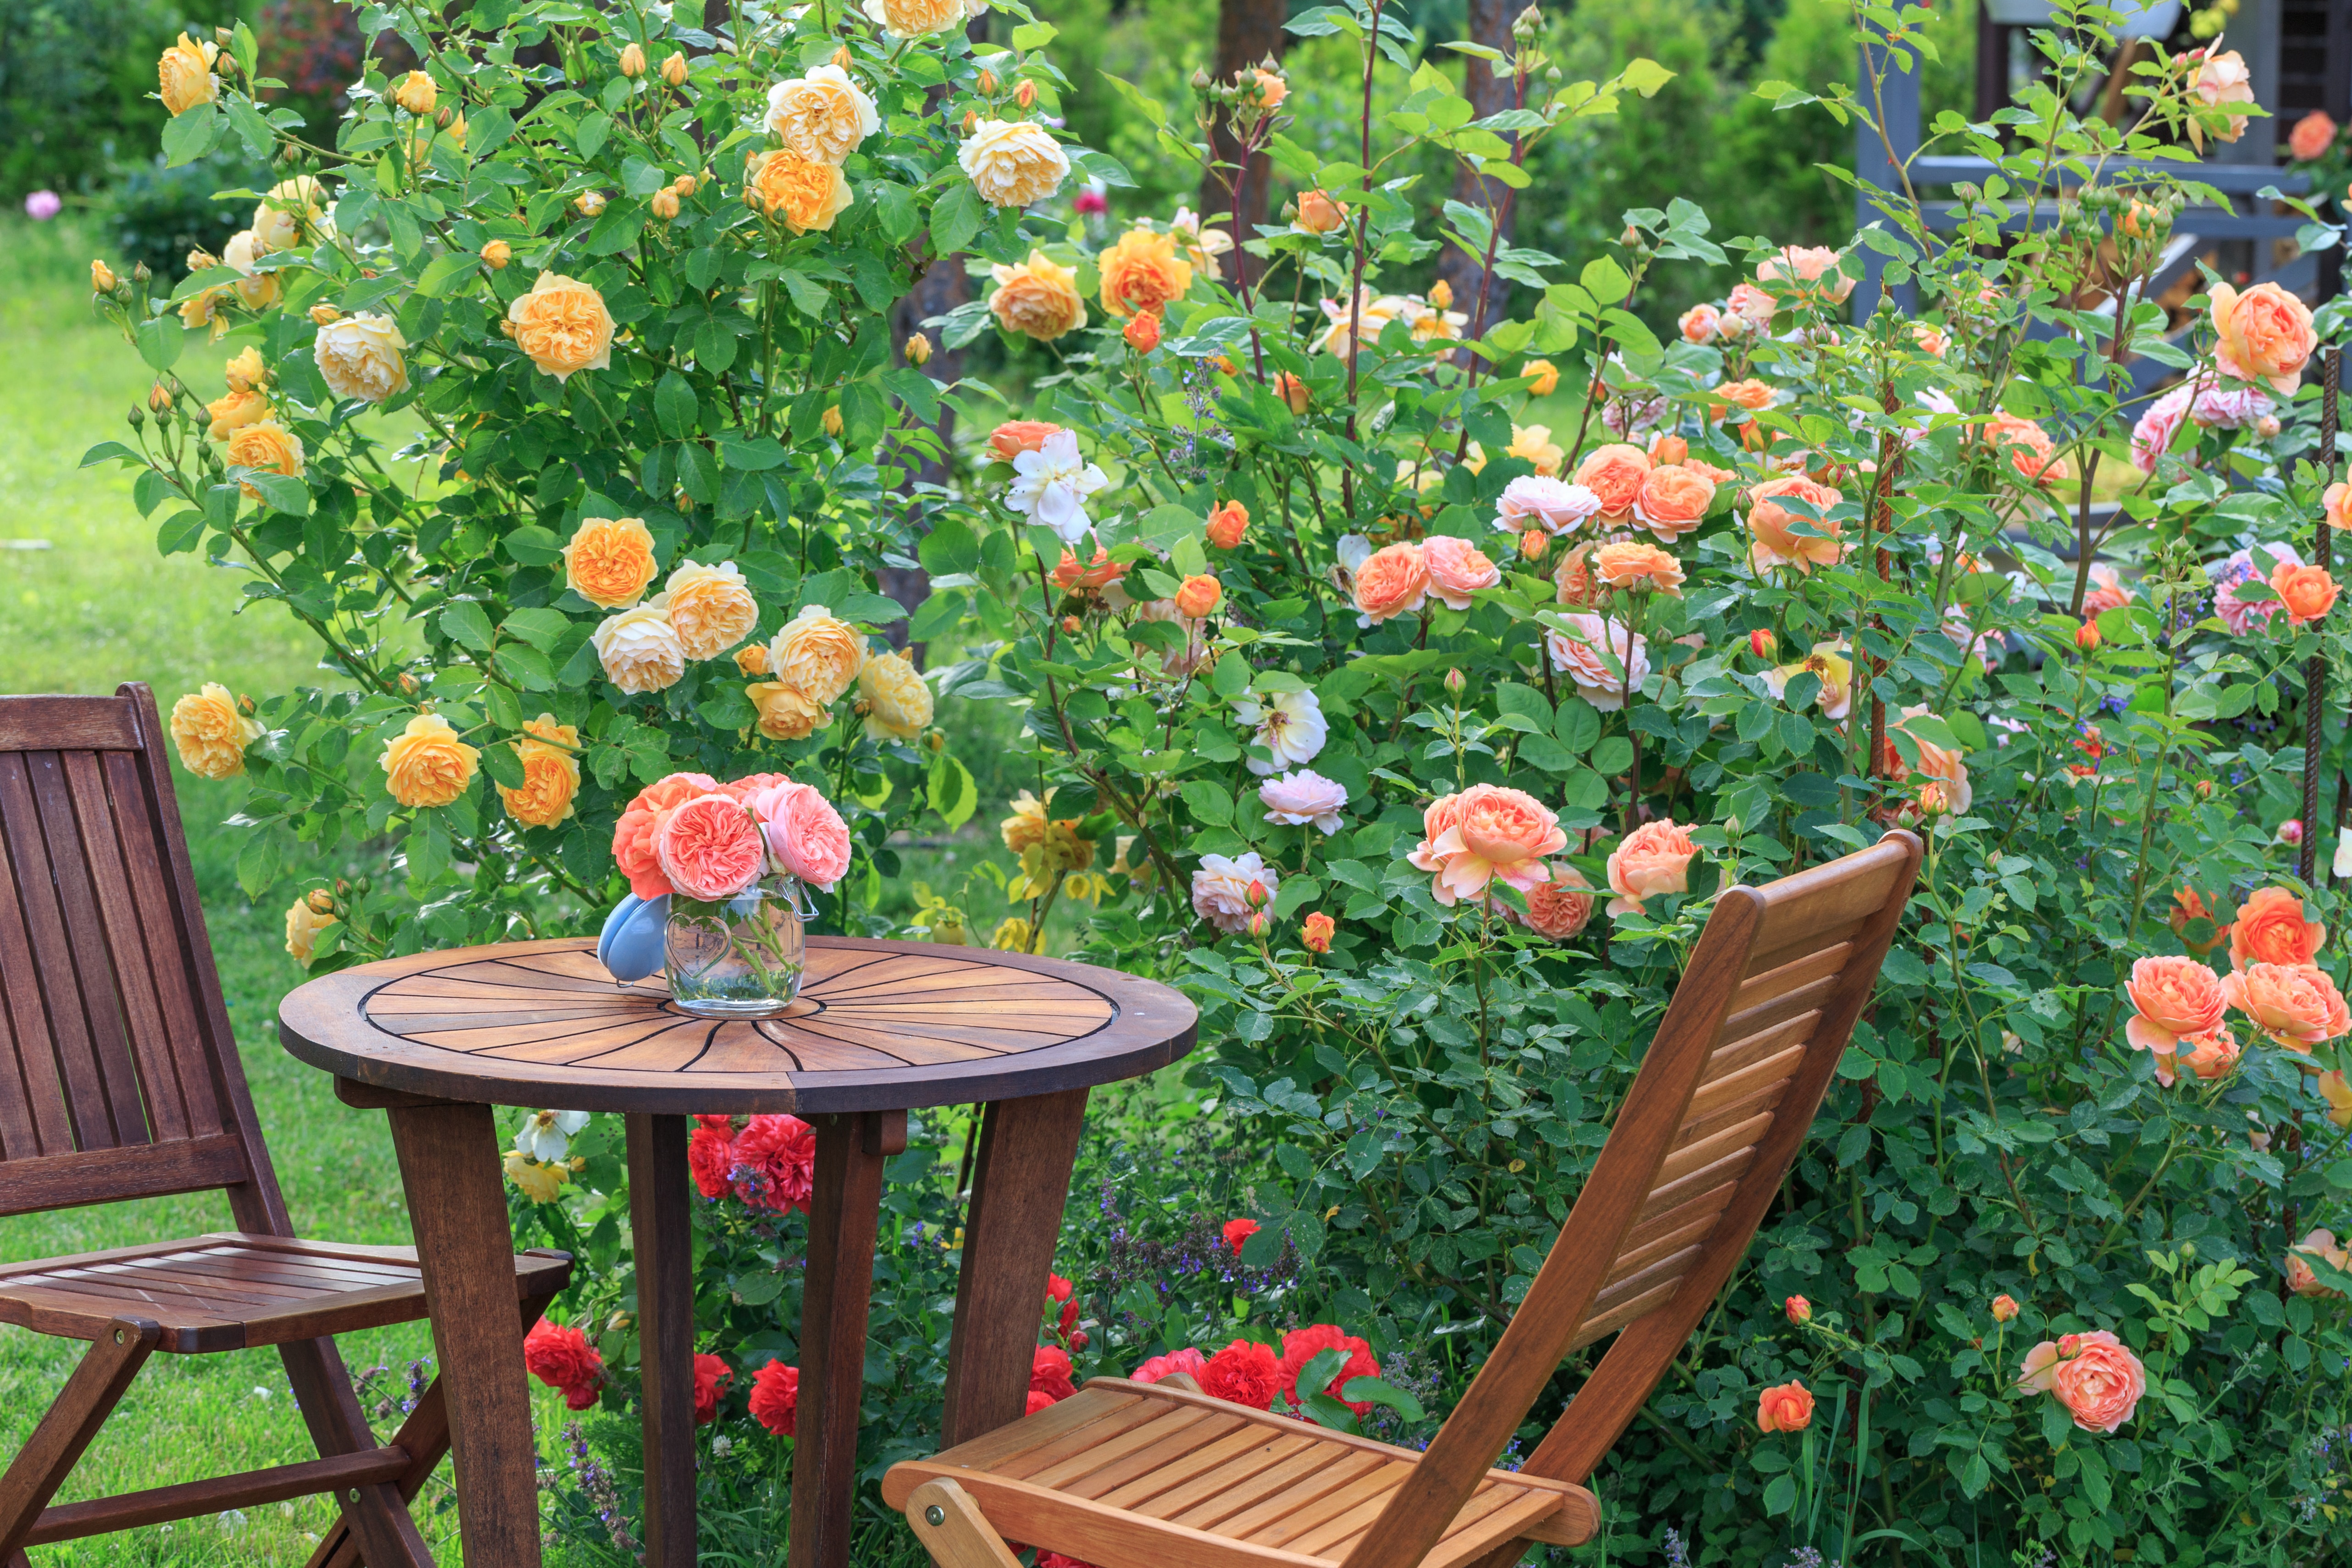 Romantic sitting area in the rose garden, round wooden table and chairs near the large flowering bushes of English roses.